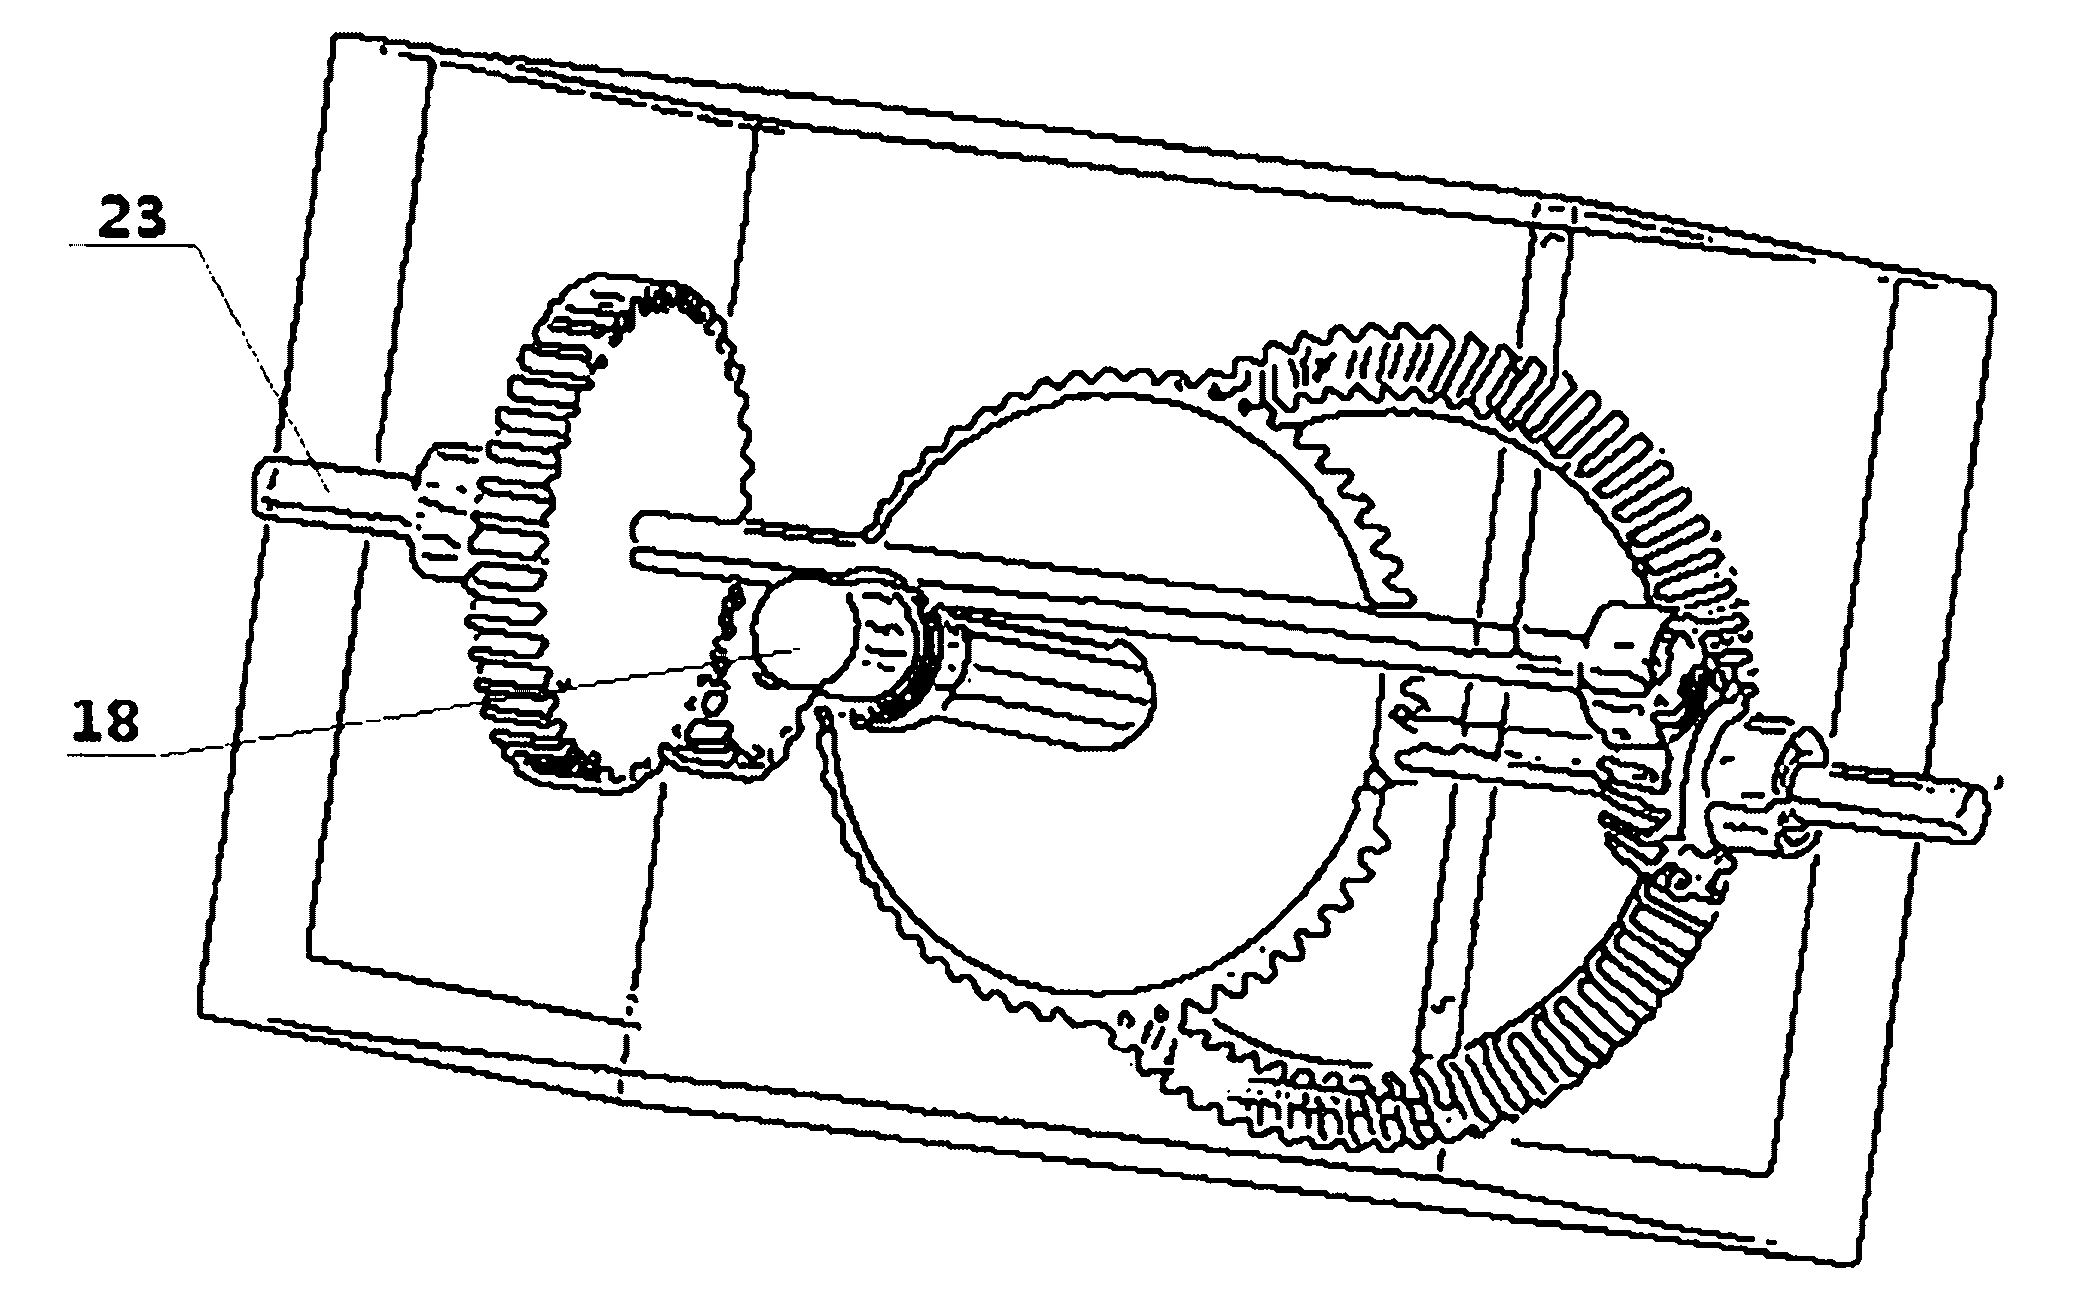 Transmission mechanism for tripe-perched vehicle